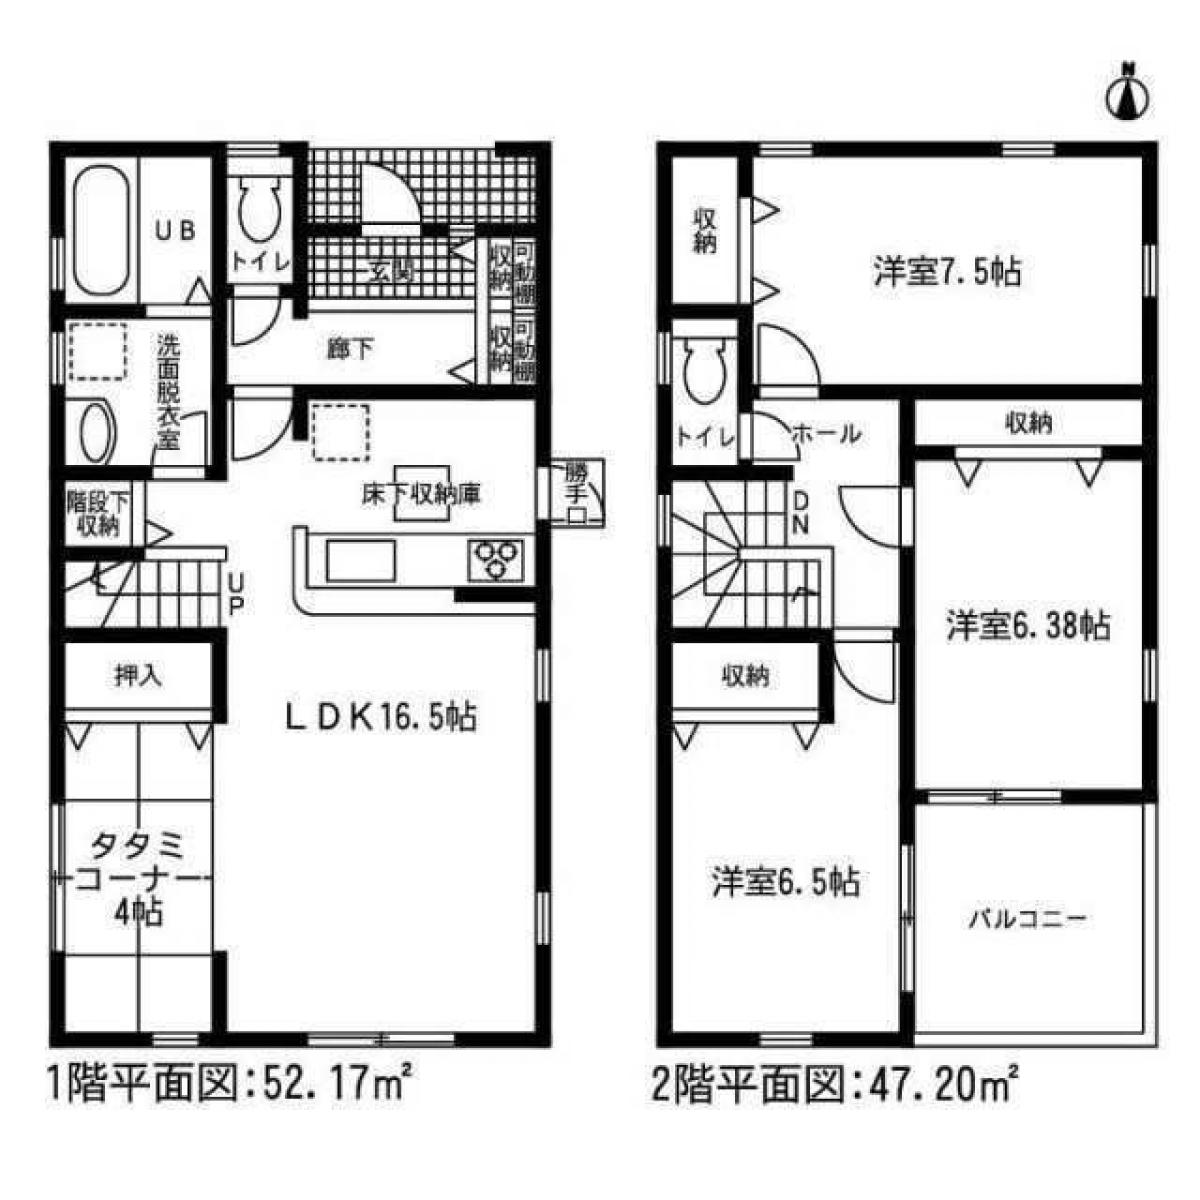 Picture of Home For Sale in Ama Shi, Aichi, Japan